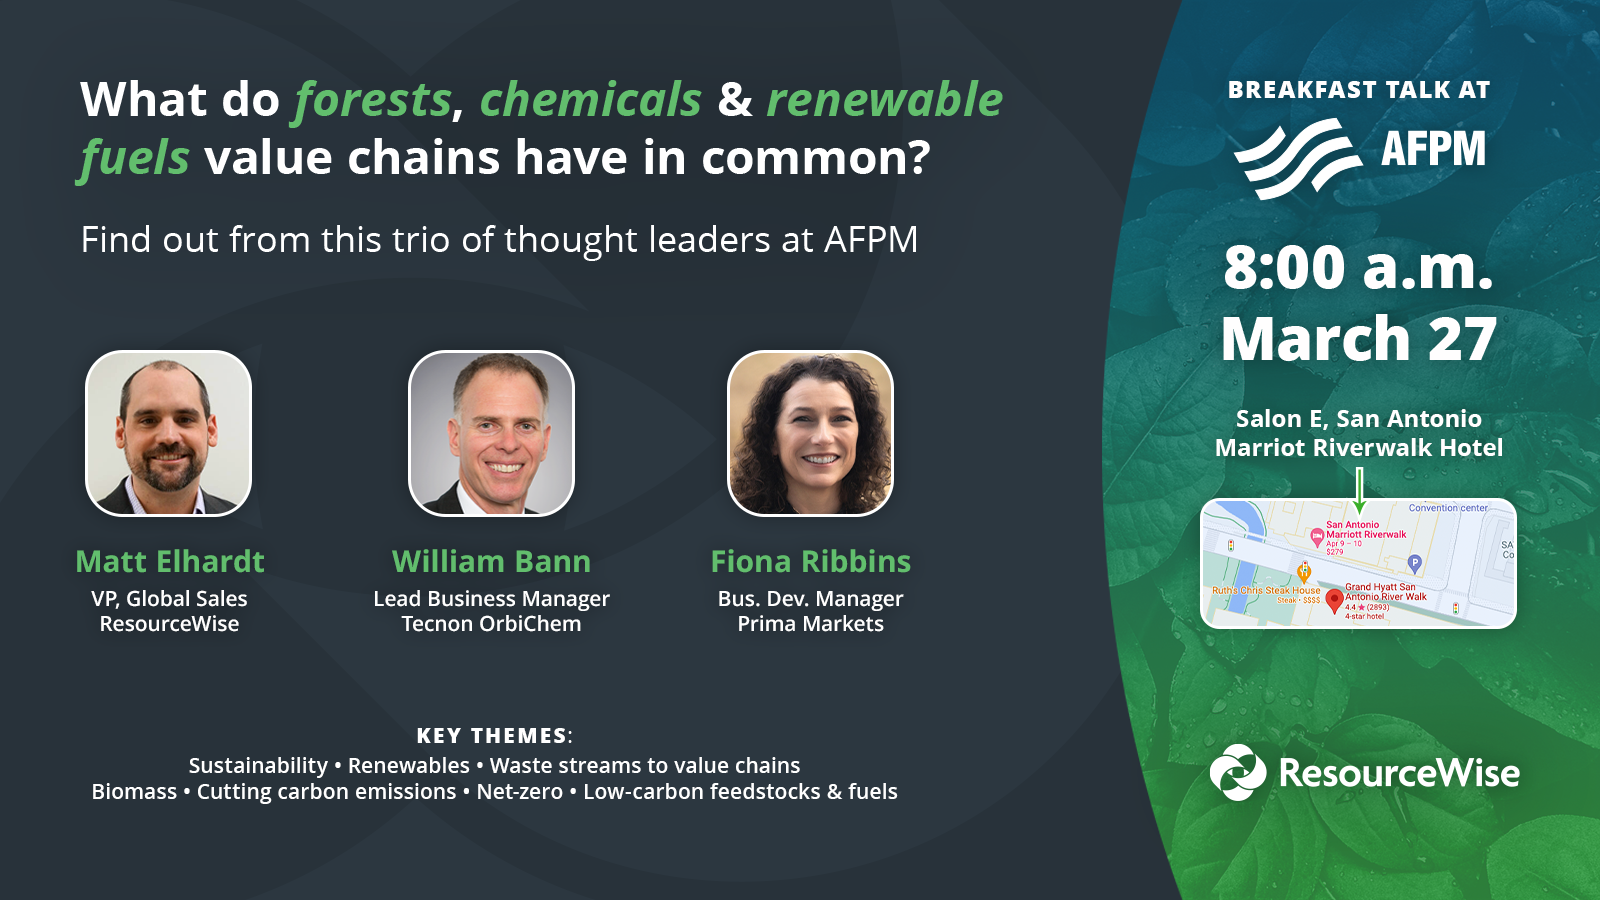 Transforming fuels & feedstocks: From old carbon to low carbon - AFPM breakfast talk